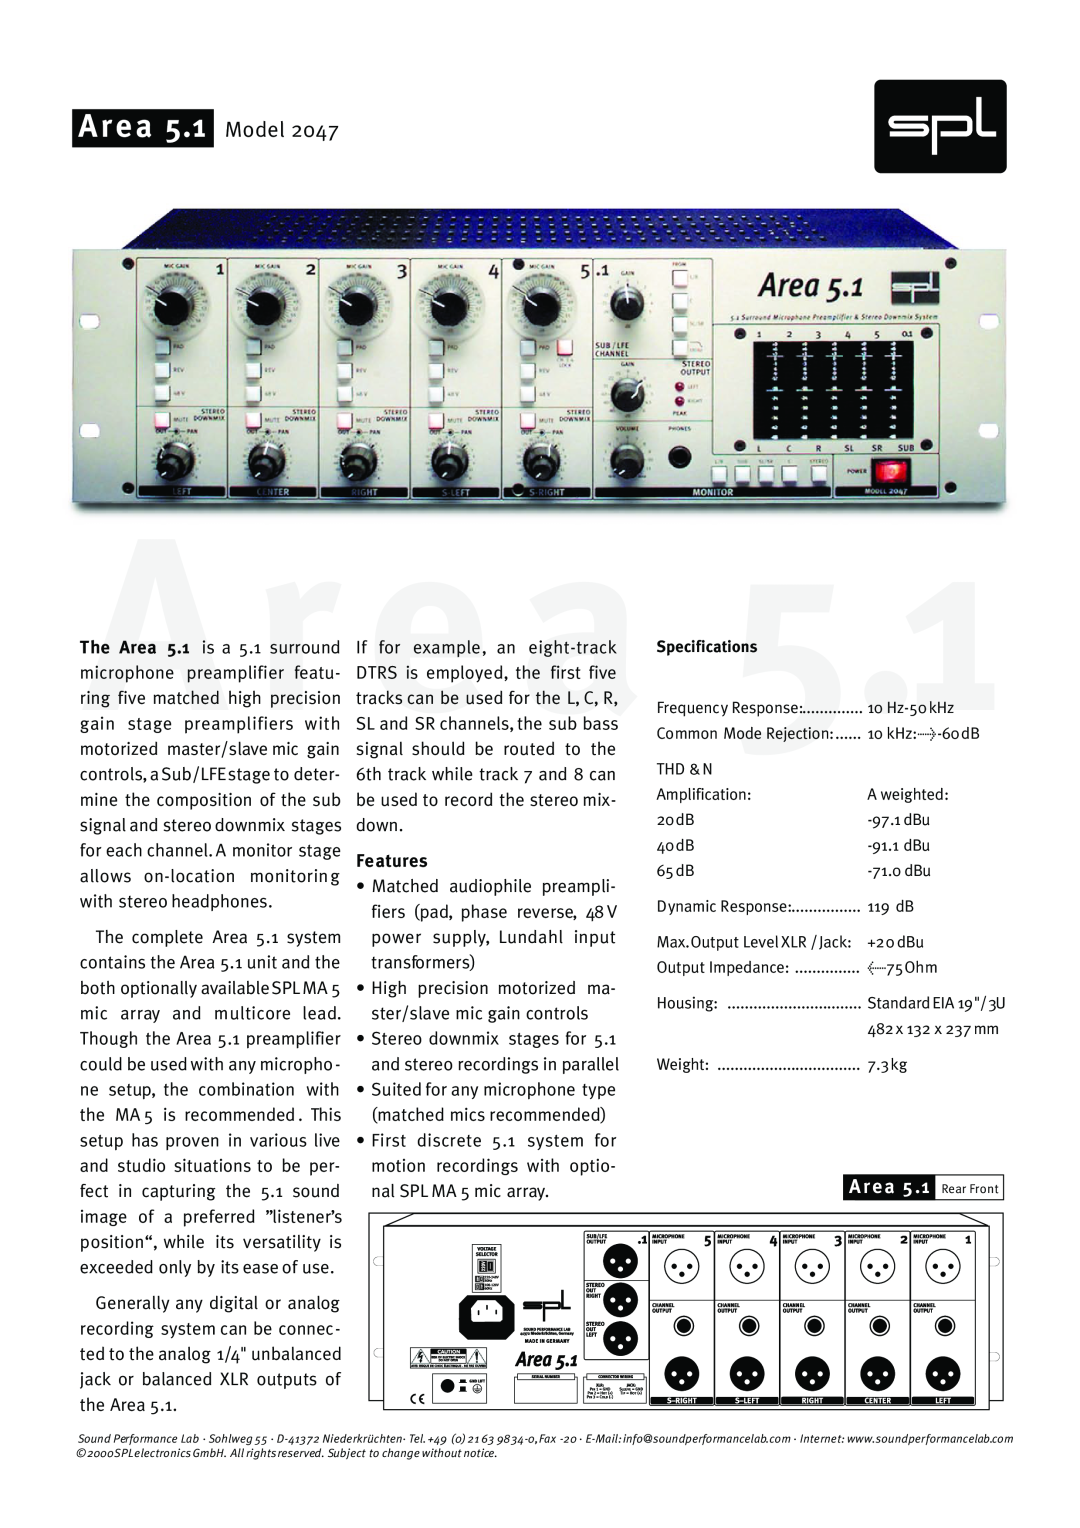 Sound Performance Lab 2047 specifications Area 5.1 Model, Area 5 .1 Rear Front, Features 